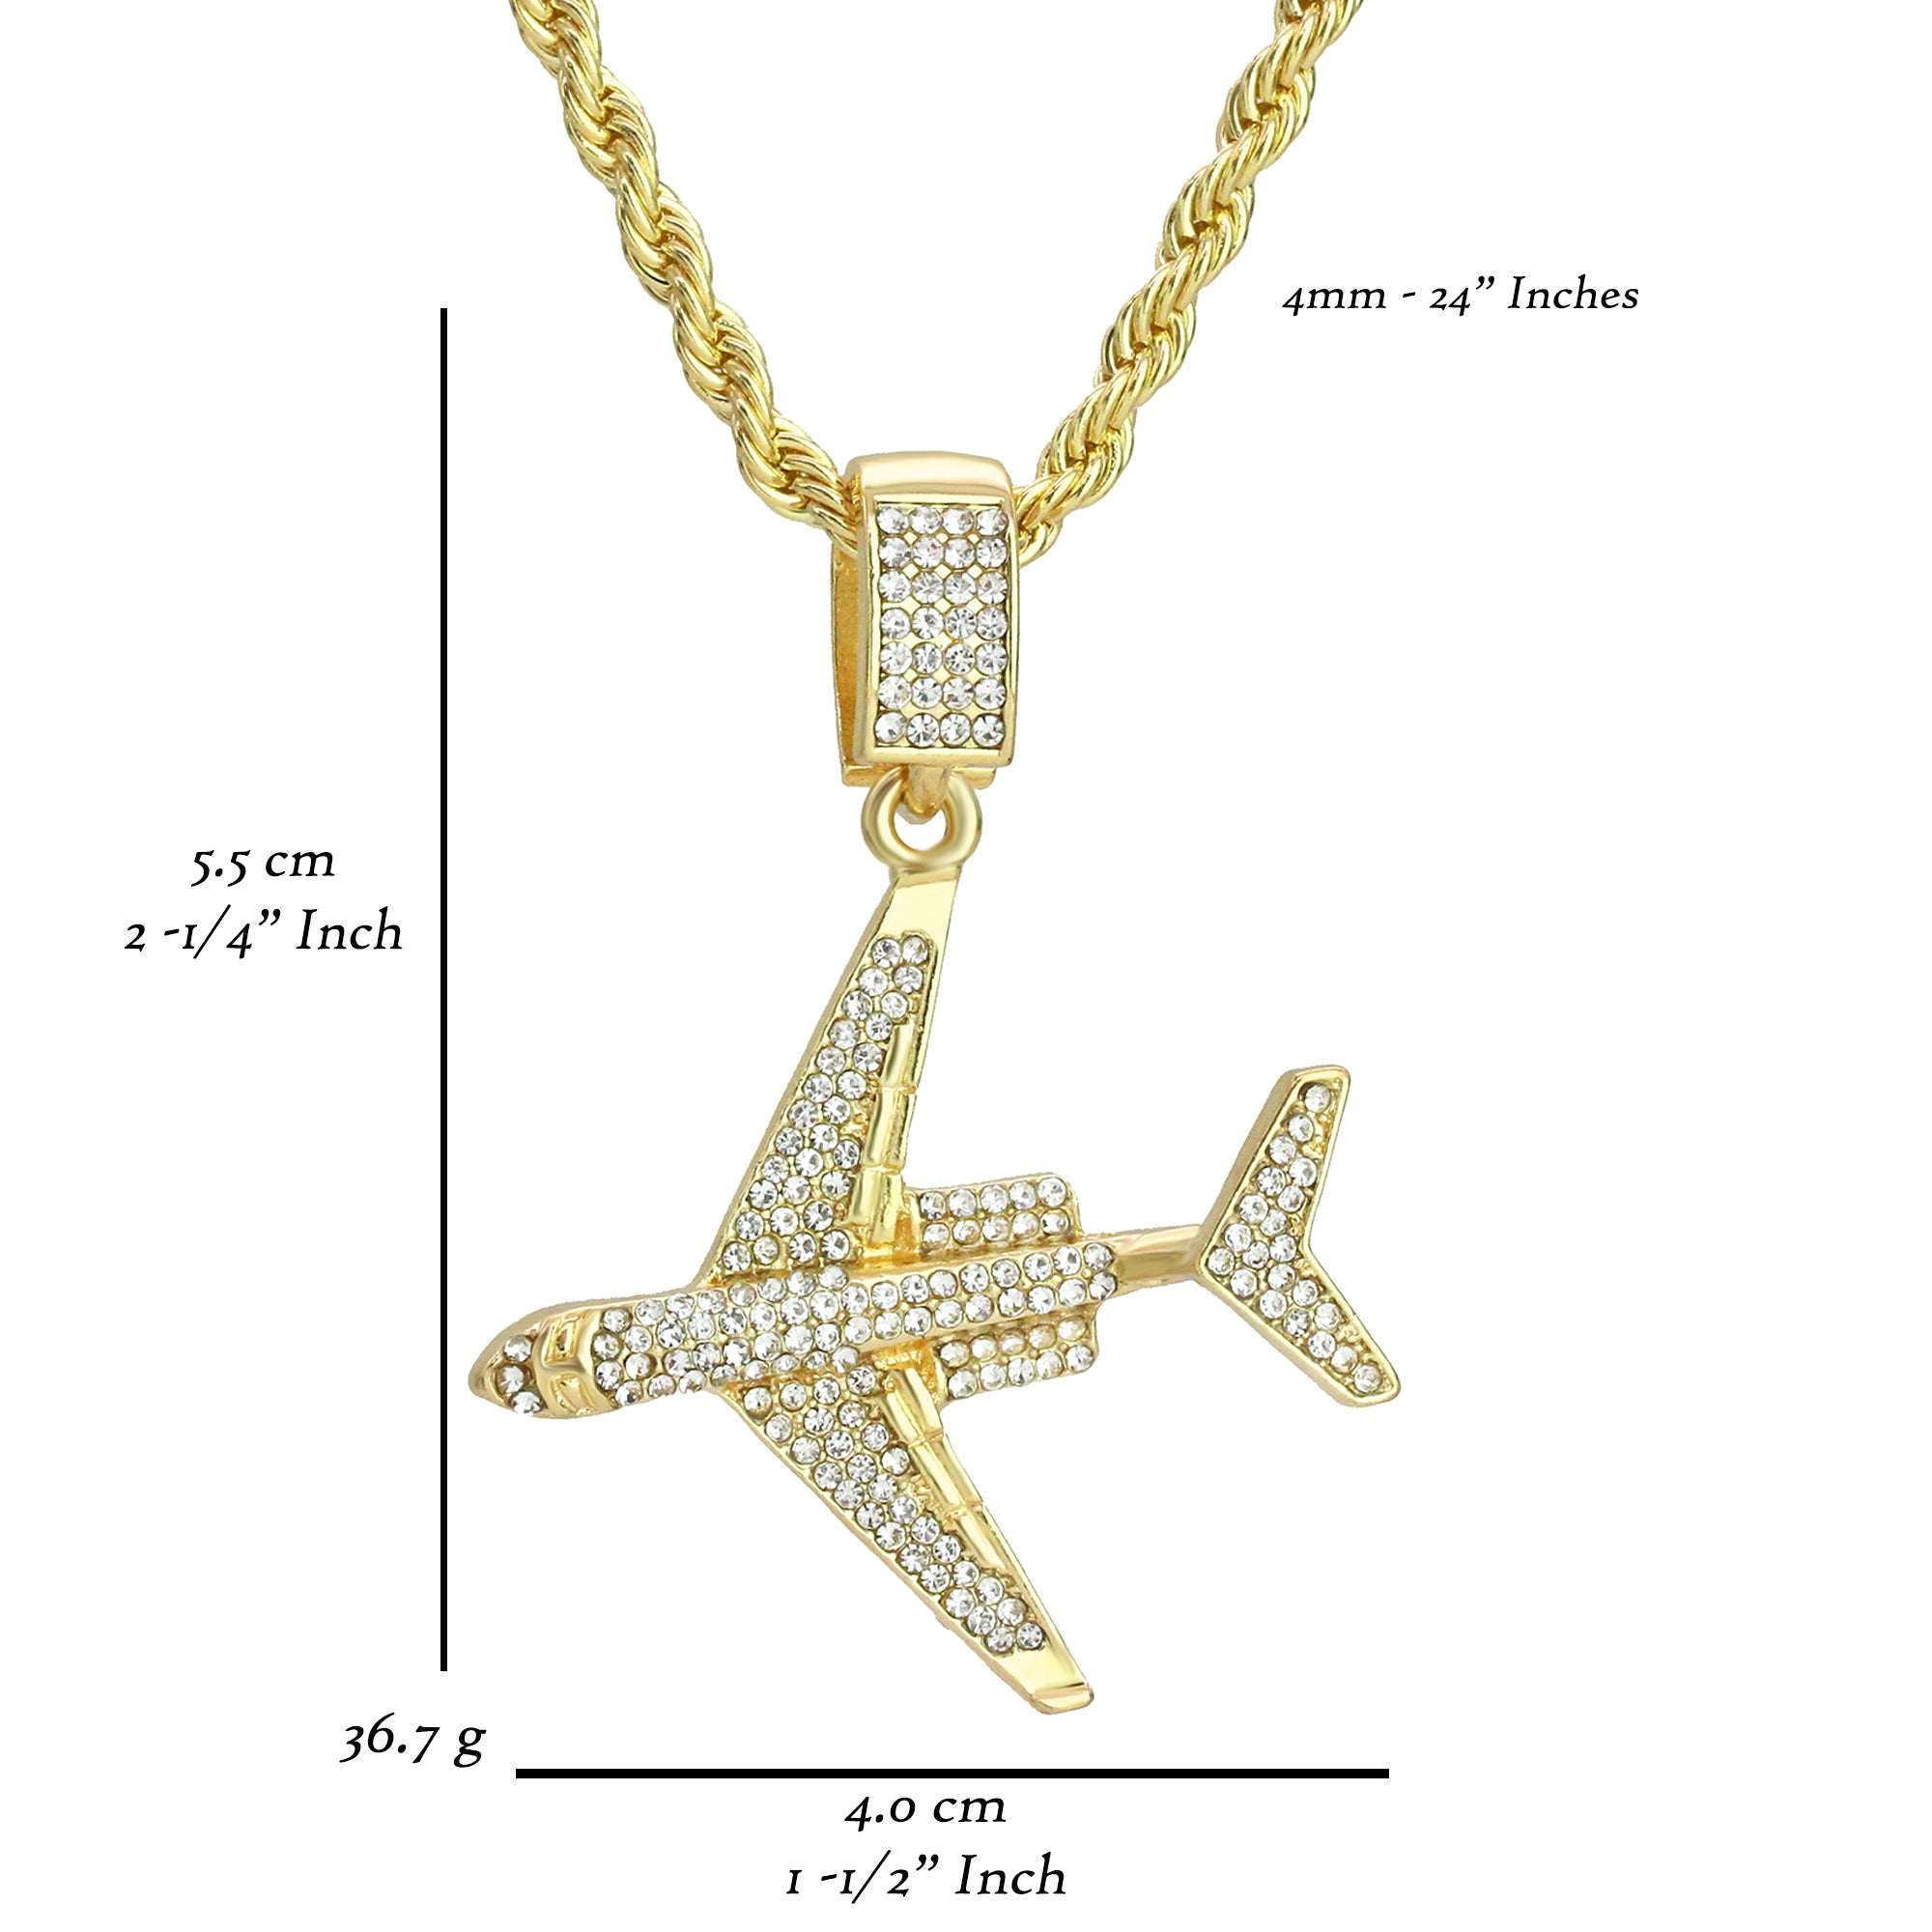 Wholesale Factory wholesale customization High quality airplane necklace -  a man's copper-gold airplane pendant necklace with a 24 From m.